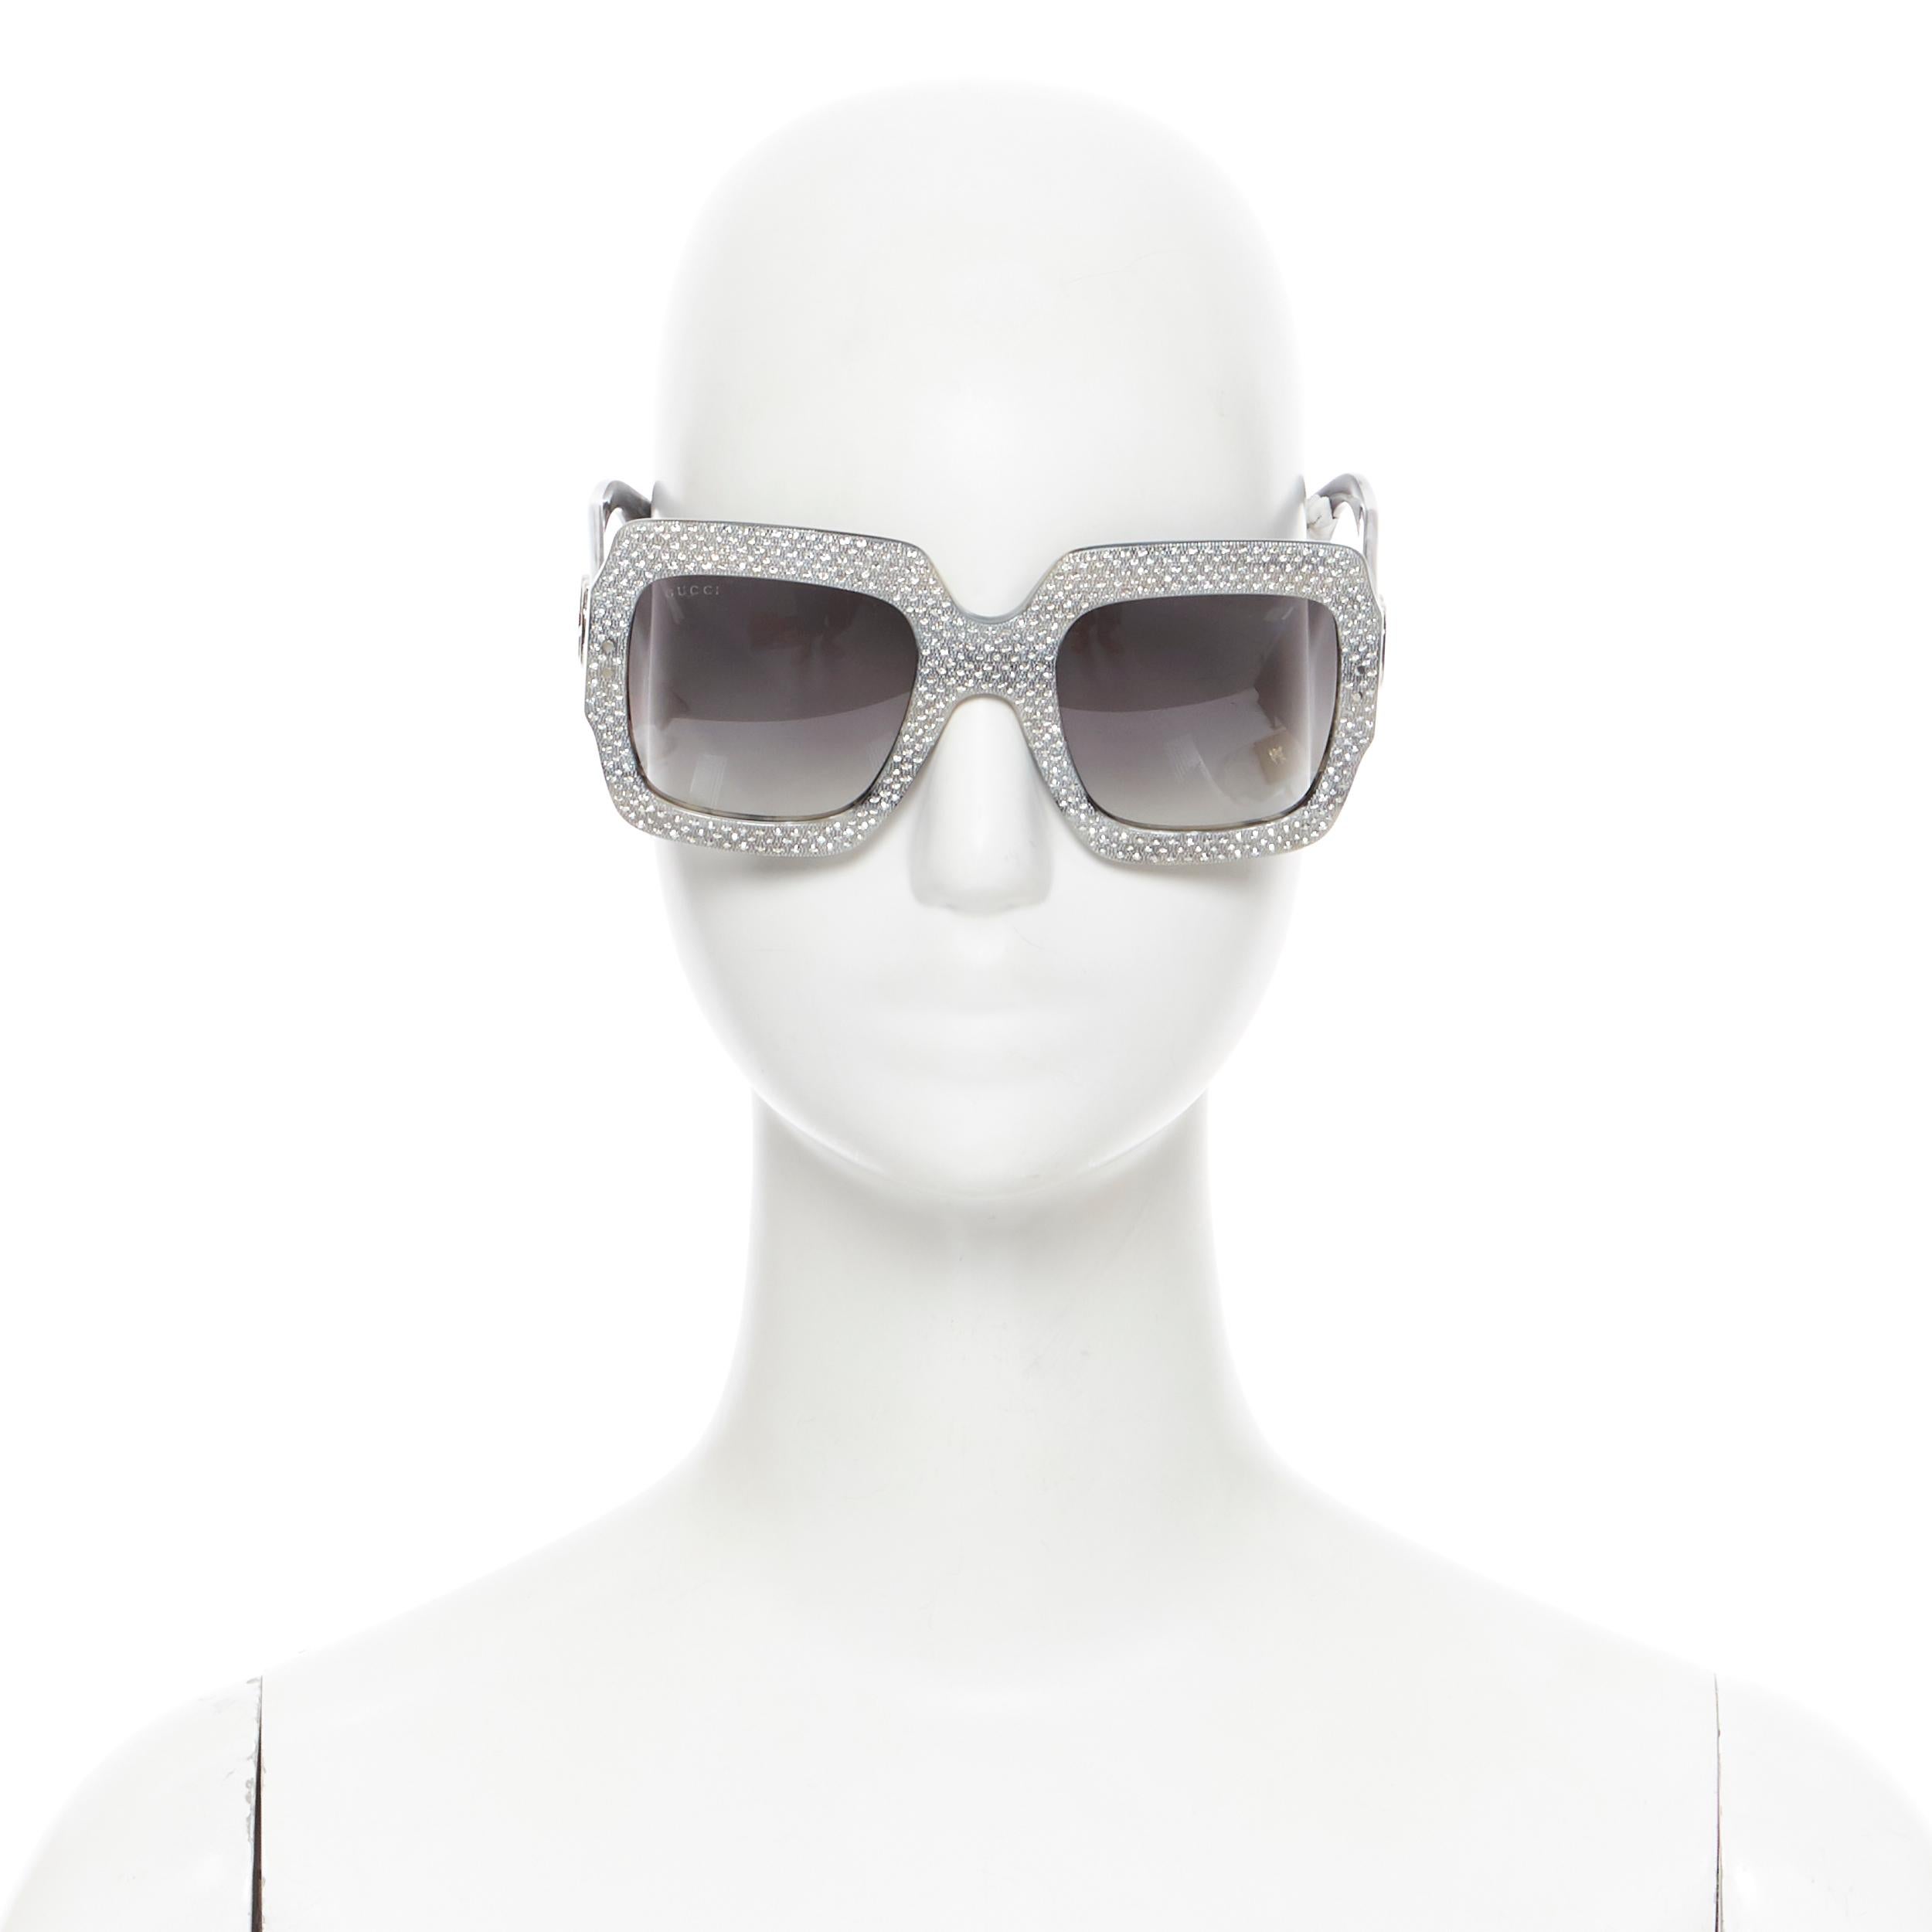 new GUCCI silver crystal strass embellished oversized gradient square sunglasses
Brand: Gucci
Model Name / Style: Crystal sunglasses
Material: PVC
Color: Silver
Pattern: Solid
Extra Detail: Grey marbled acetate Gucci oversize square sunglasses with